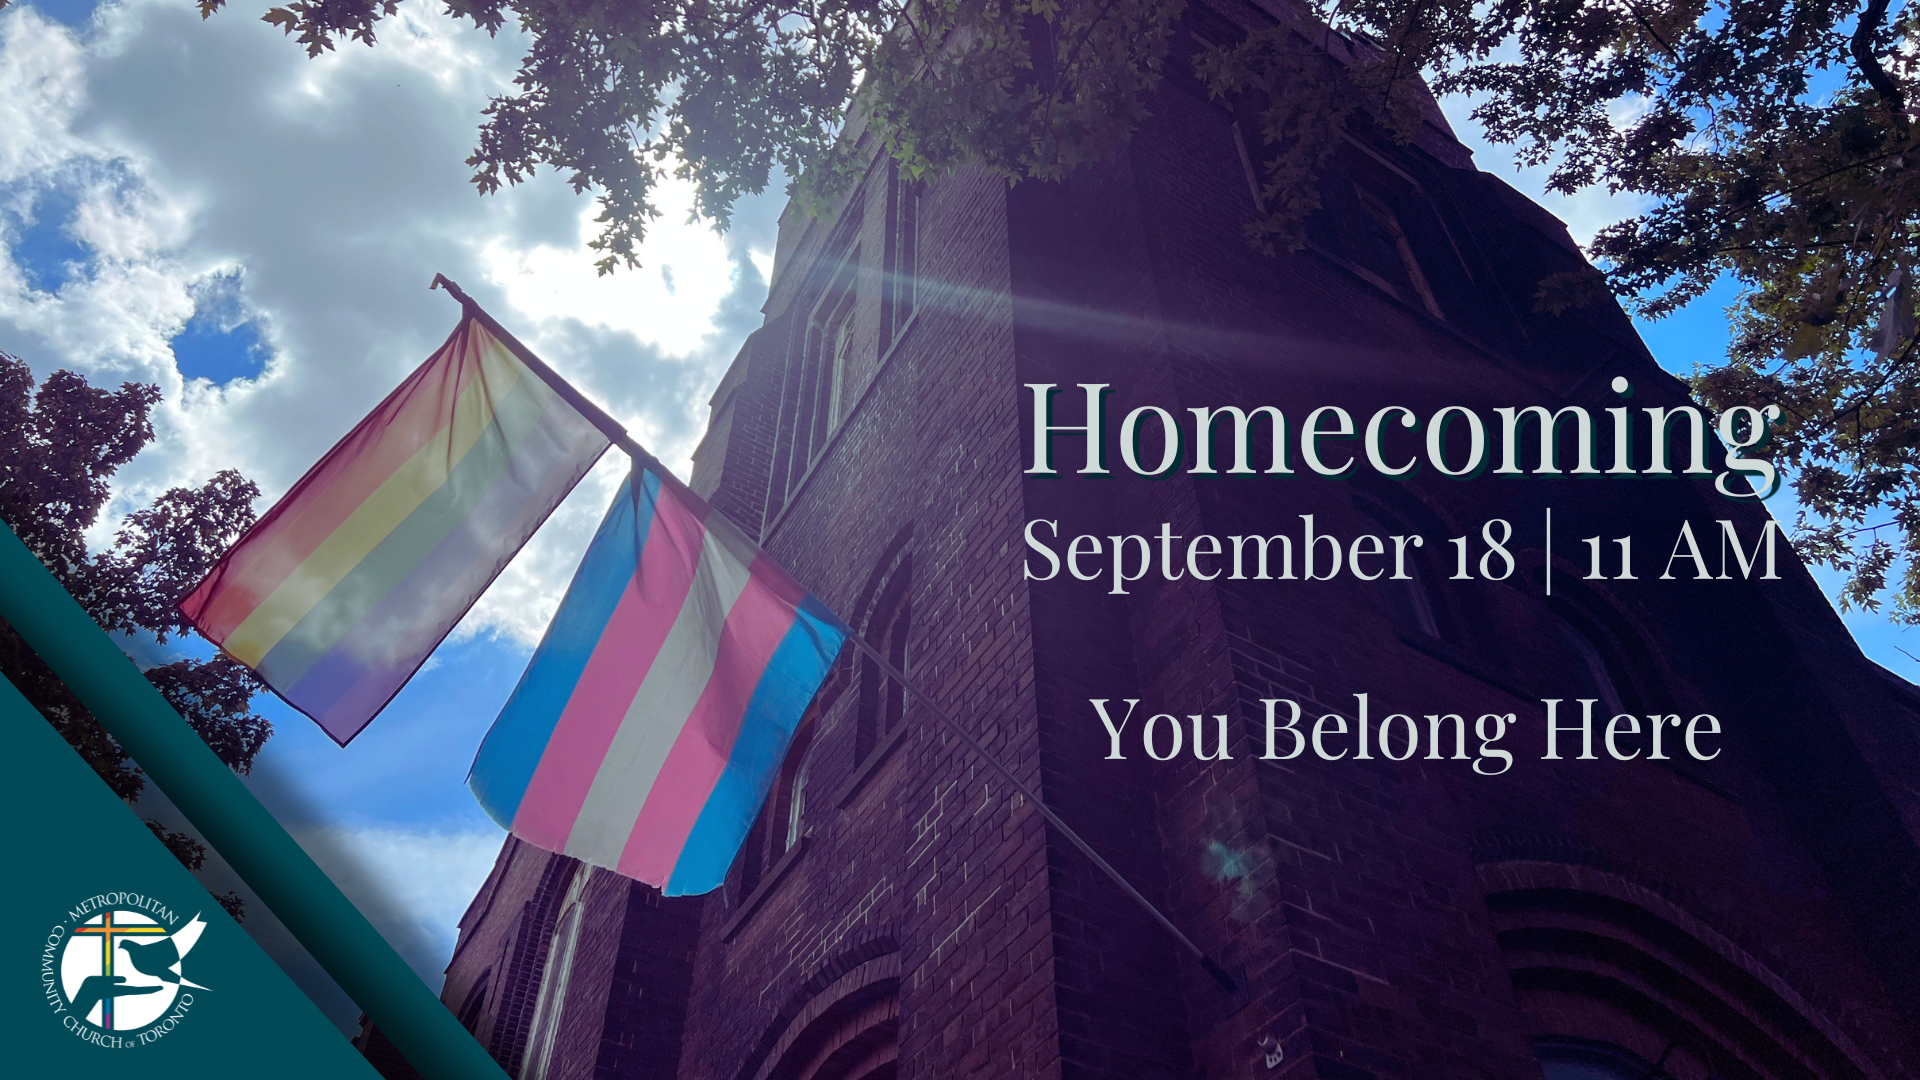 Picture of MCC Toronto's building with text saying Homecoming. September 18. All are welcome.